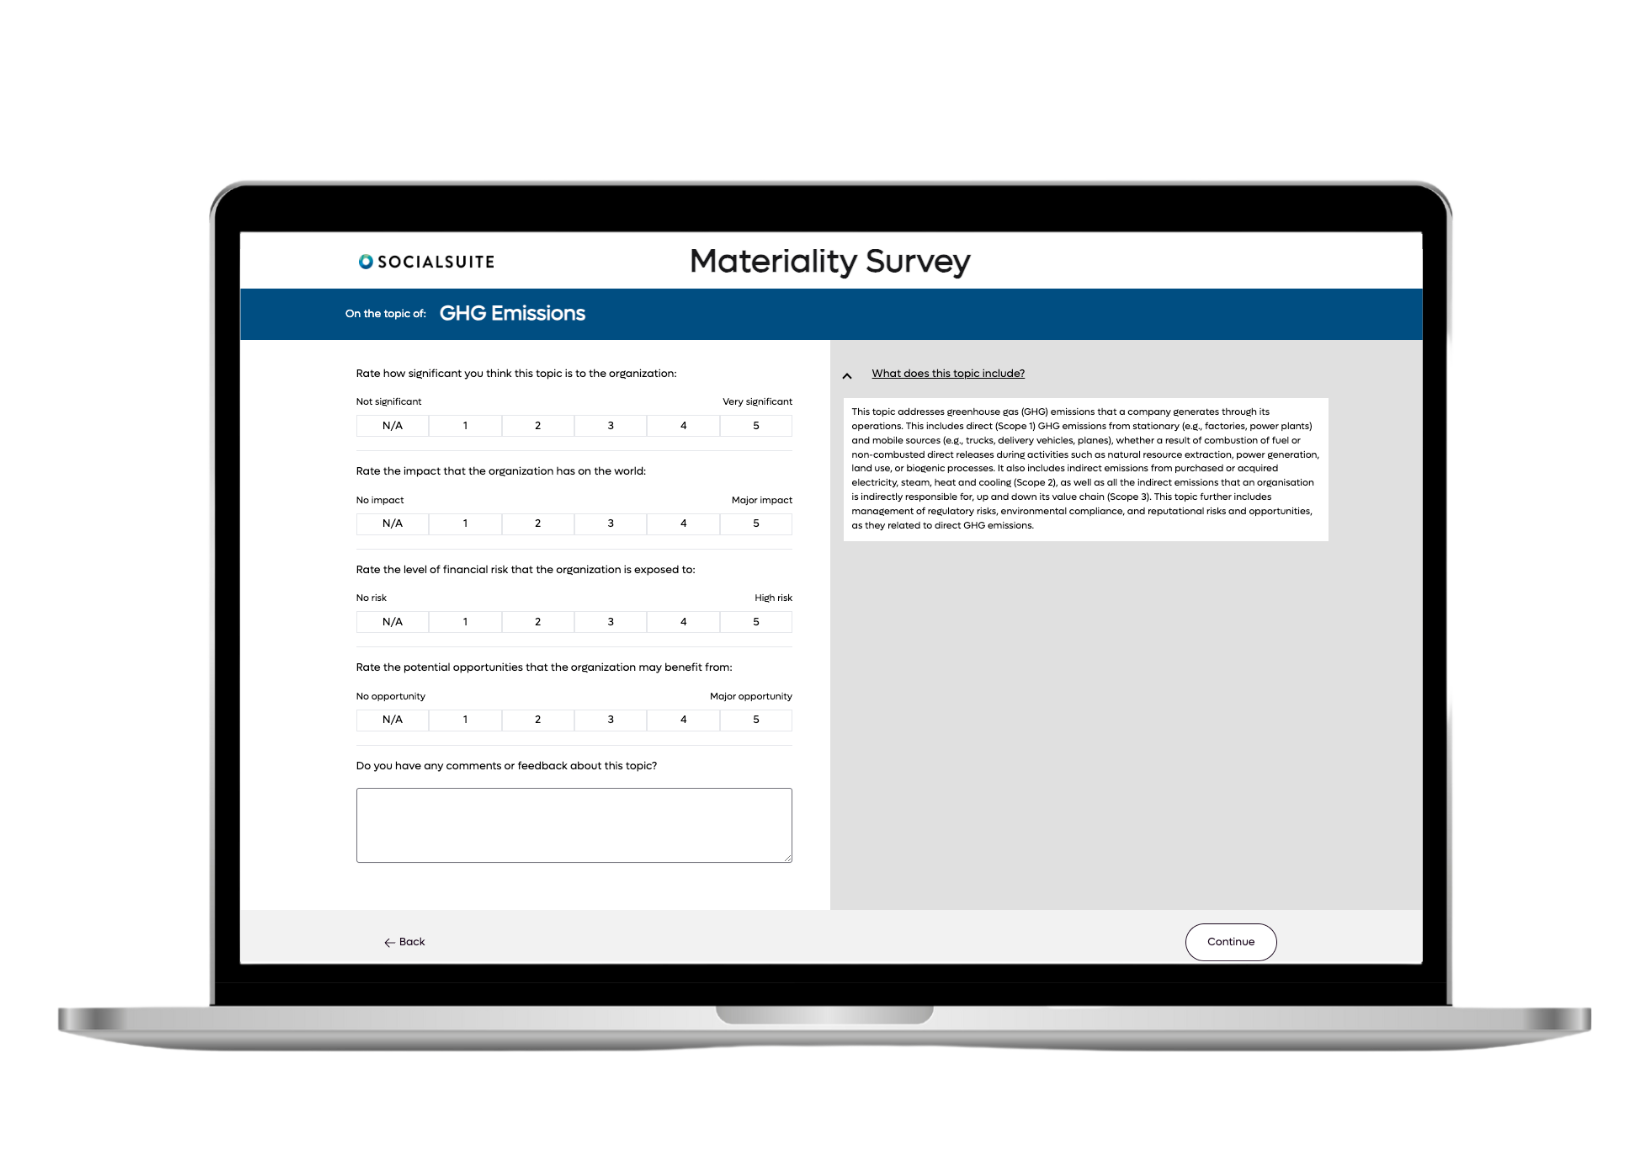 Each material topic chosen will have designated questions to identify what stakeholders believe to be it's impact, risk, and opportunity. Their responses and our scoring methodology will provide a topic's materiality score.